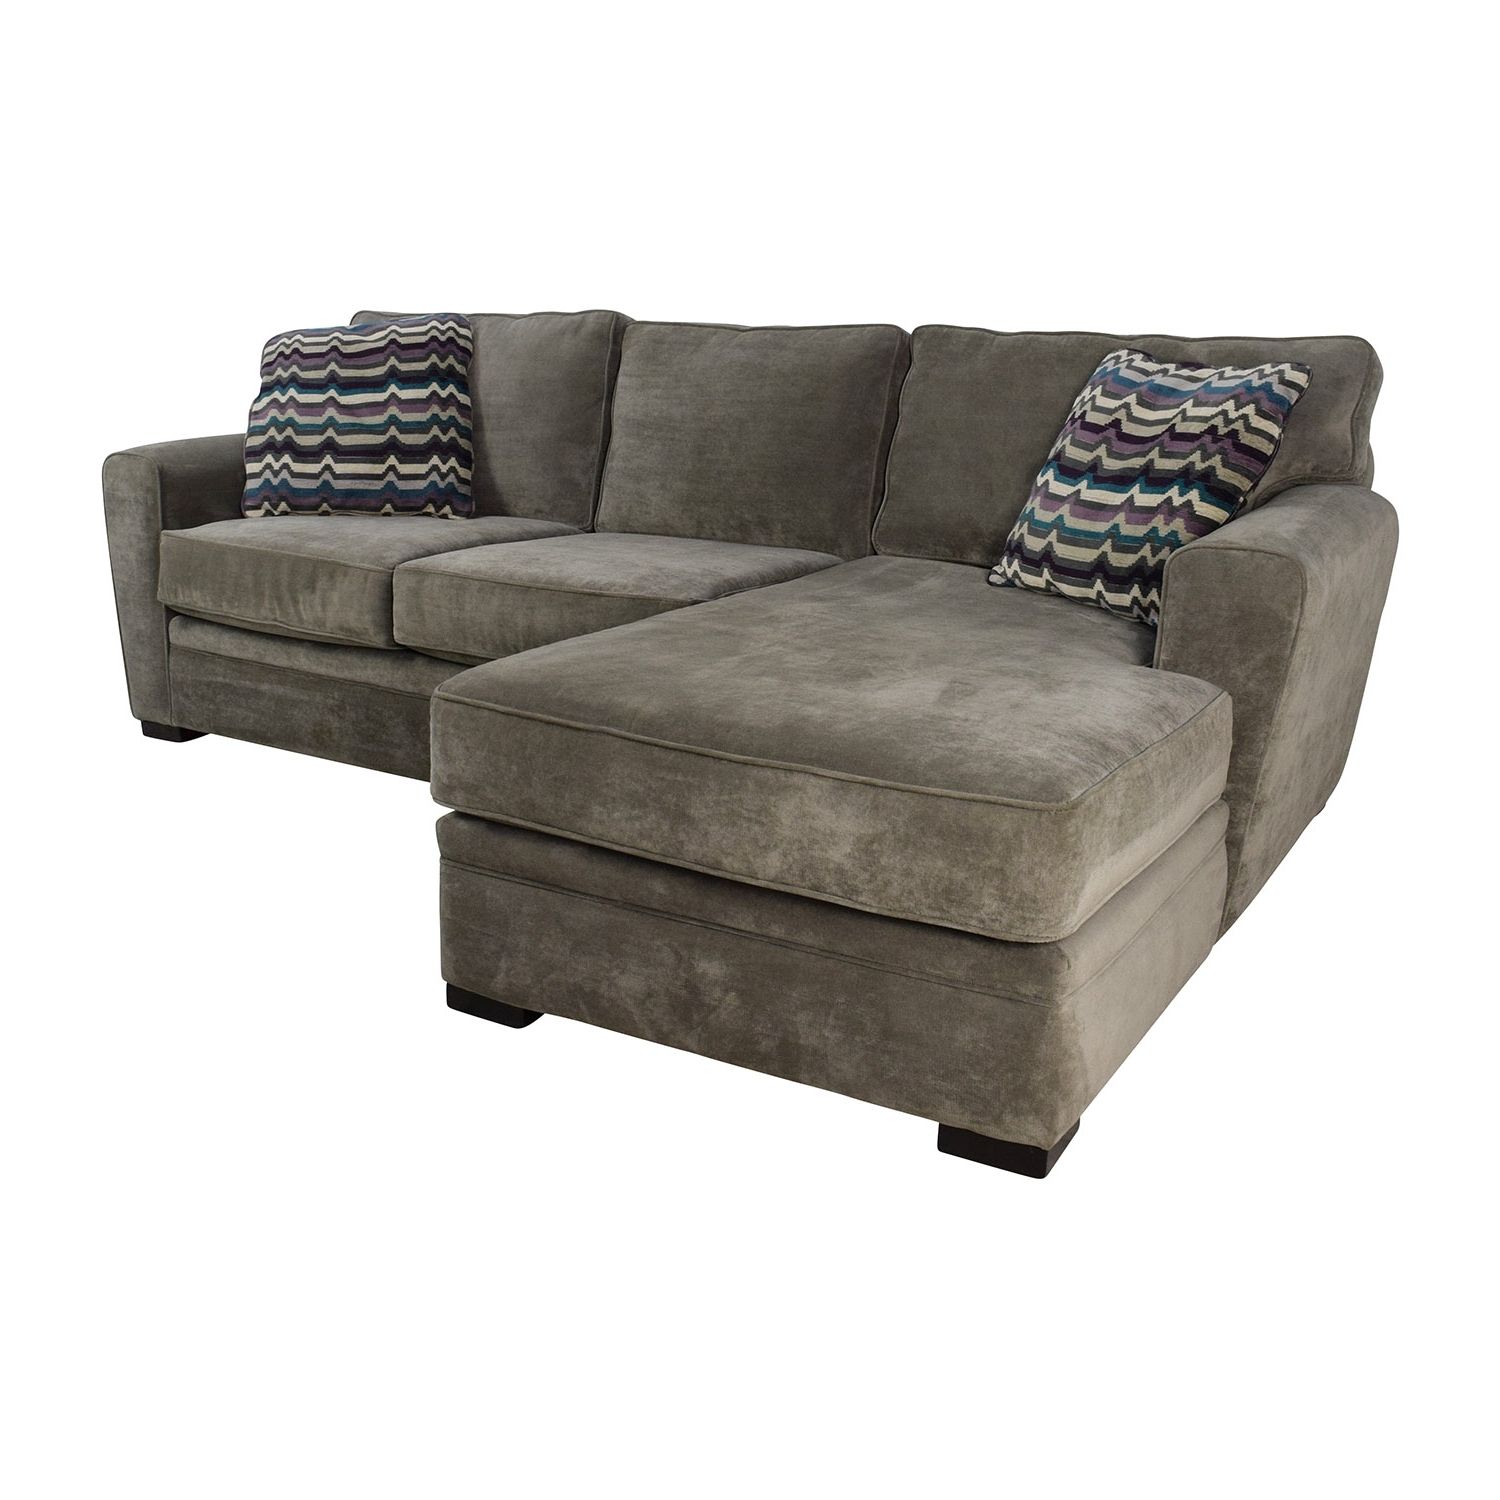 [%52% Off – Raymour & Flanigan Raymour & Flanigan Artemis Ii Throughout Current Sectional Sofas At Raymour And Flanigan|Sectional Sofas At Raymour And Flanigan Pertaining To Preferred 52% Off – Raymour & Flanigan Raymour & Flanigan Artemis Ii|Favorite Sectional Sofas At Raymour And Flanigan Pertaining To 52% Off – Raymour & Flanigan Raymour & Flanigan Artemis Ii|Well Liked 52% Off – Raymour & Flanigan Raymour & Flanigan Artemis Ii Within Sectional Sofas At Raymour And Flanigan%] (View 1 of 15)